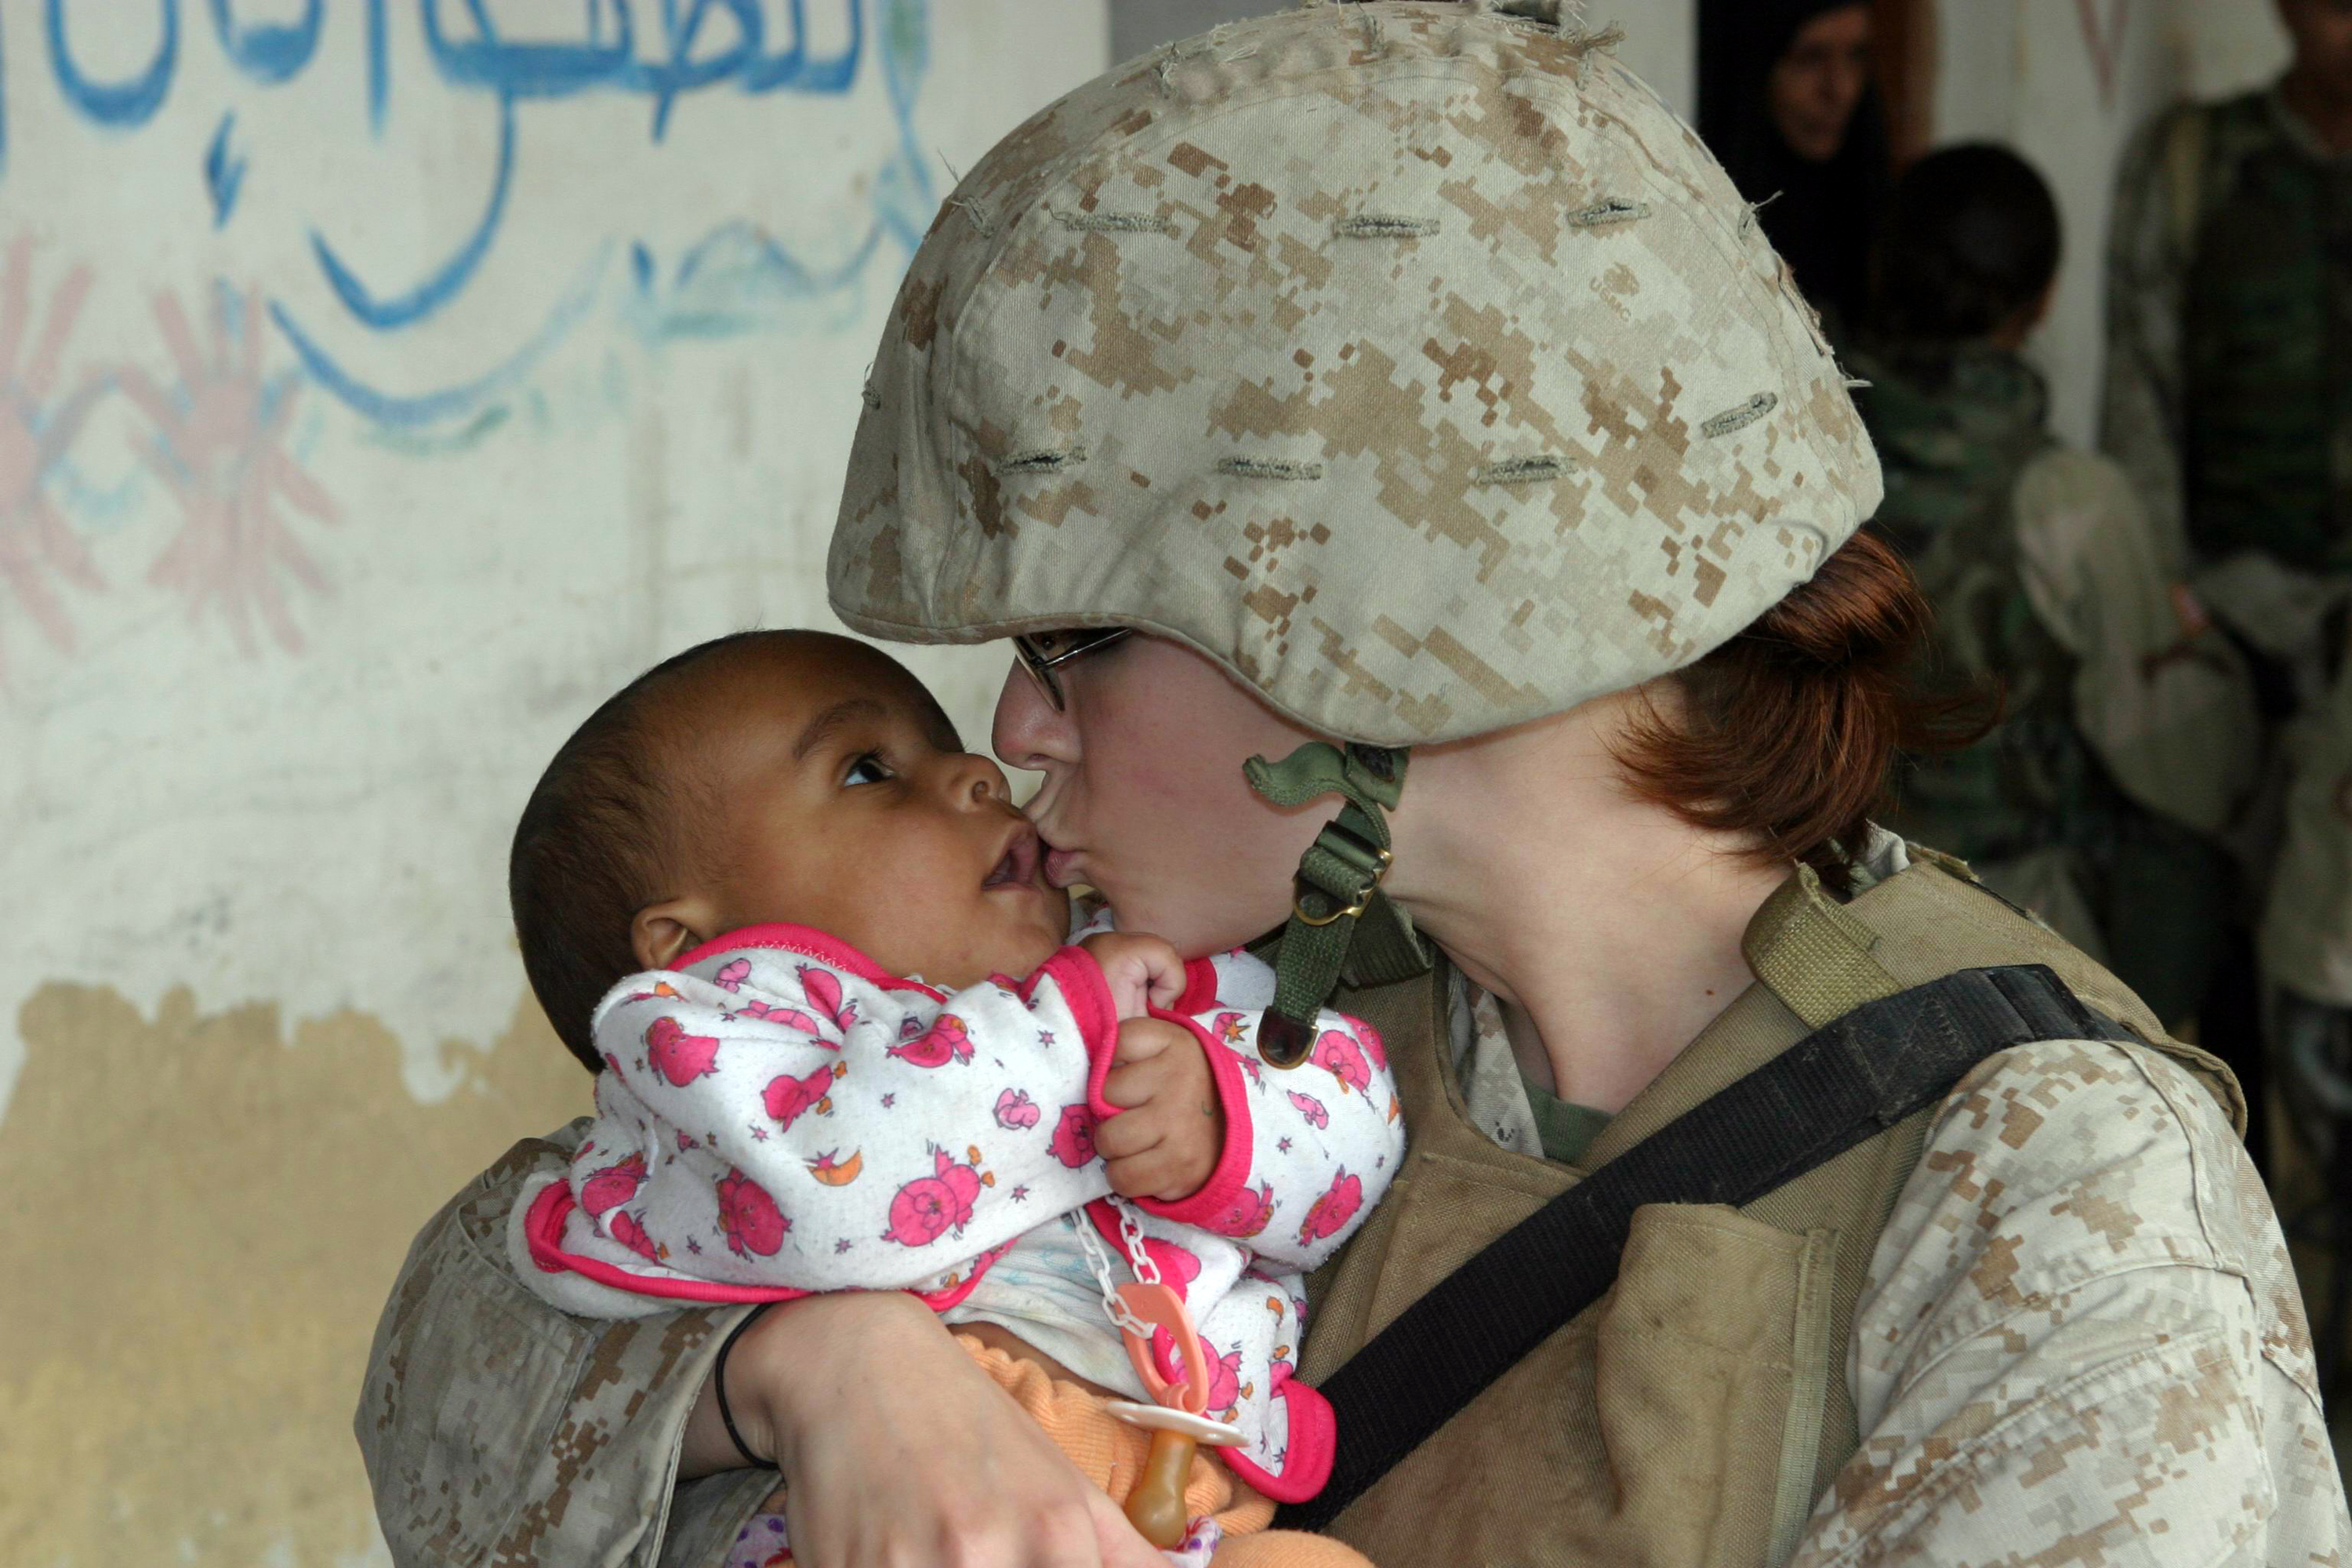 US Navy 041112-M-0095Z-181 Lance Cpl. Brandy L. Guerrero gives a kiss to an Iraqi baby waiting to be examined during a Humanitarian Assistance Operation (HAO) in the village of Ash Shafiyah, Iraq